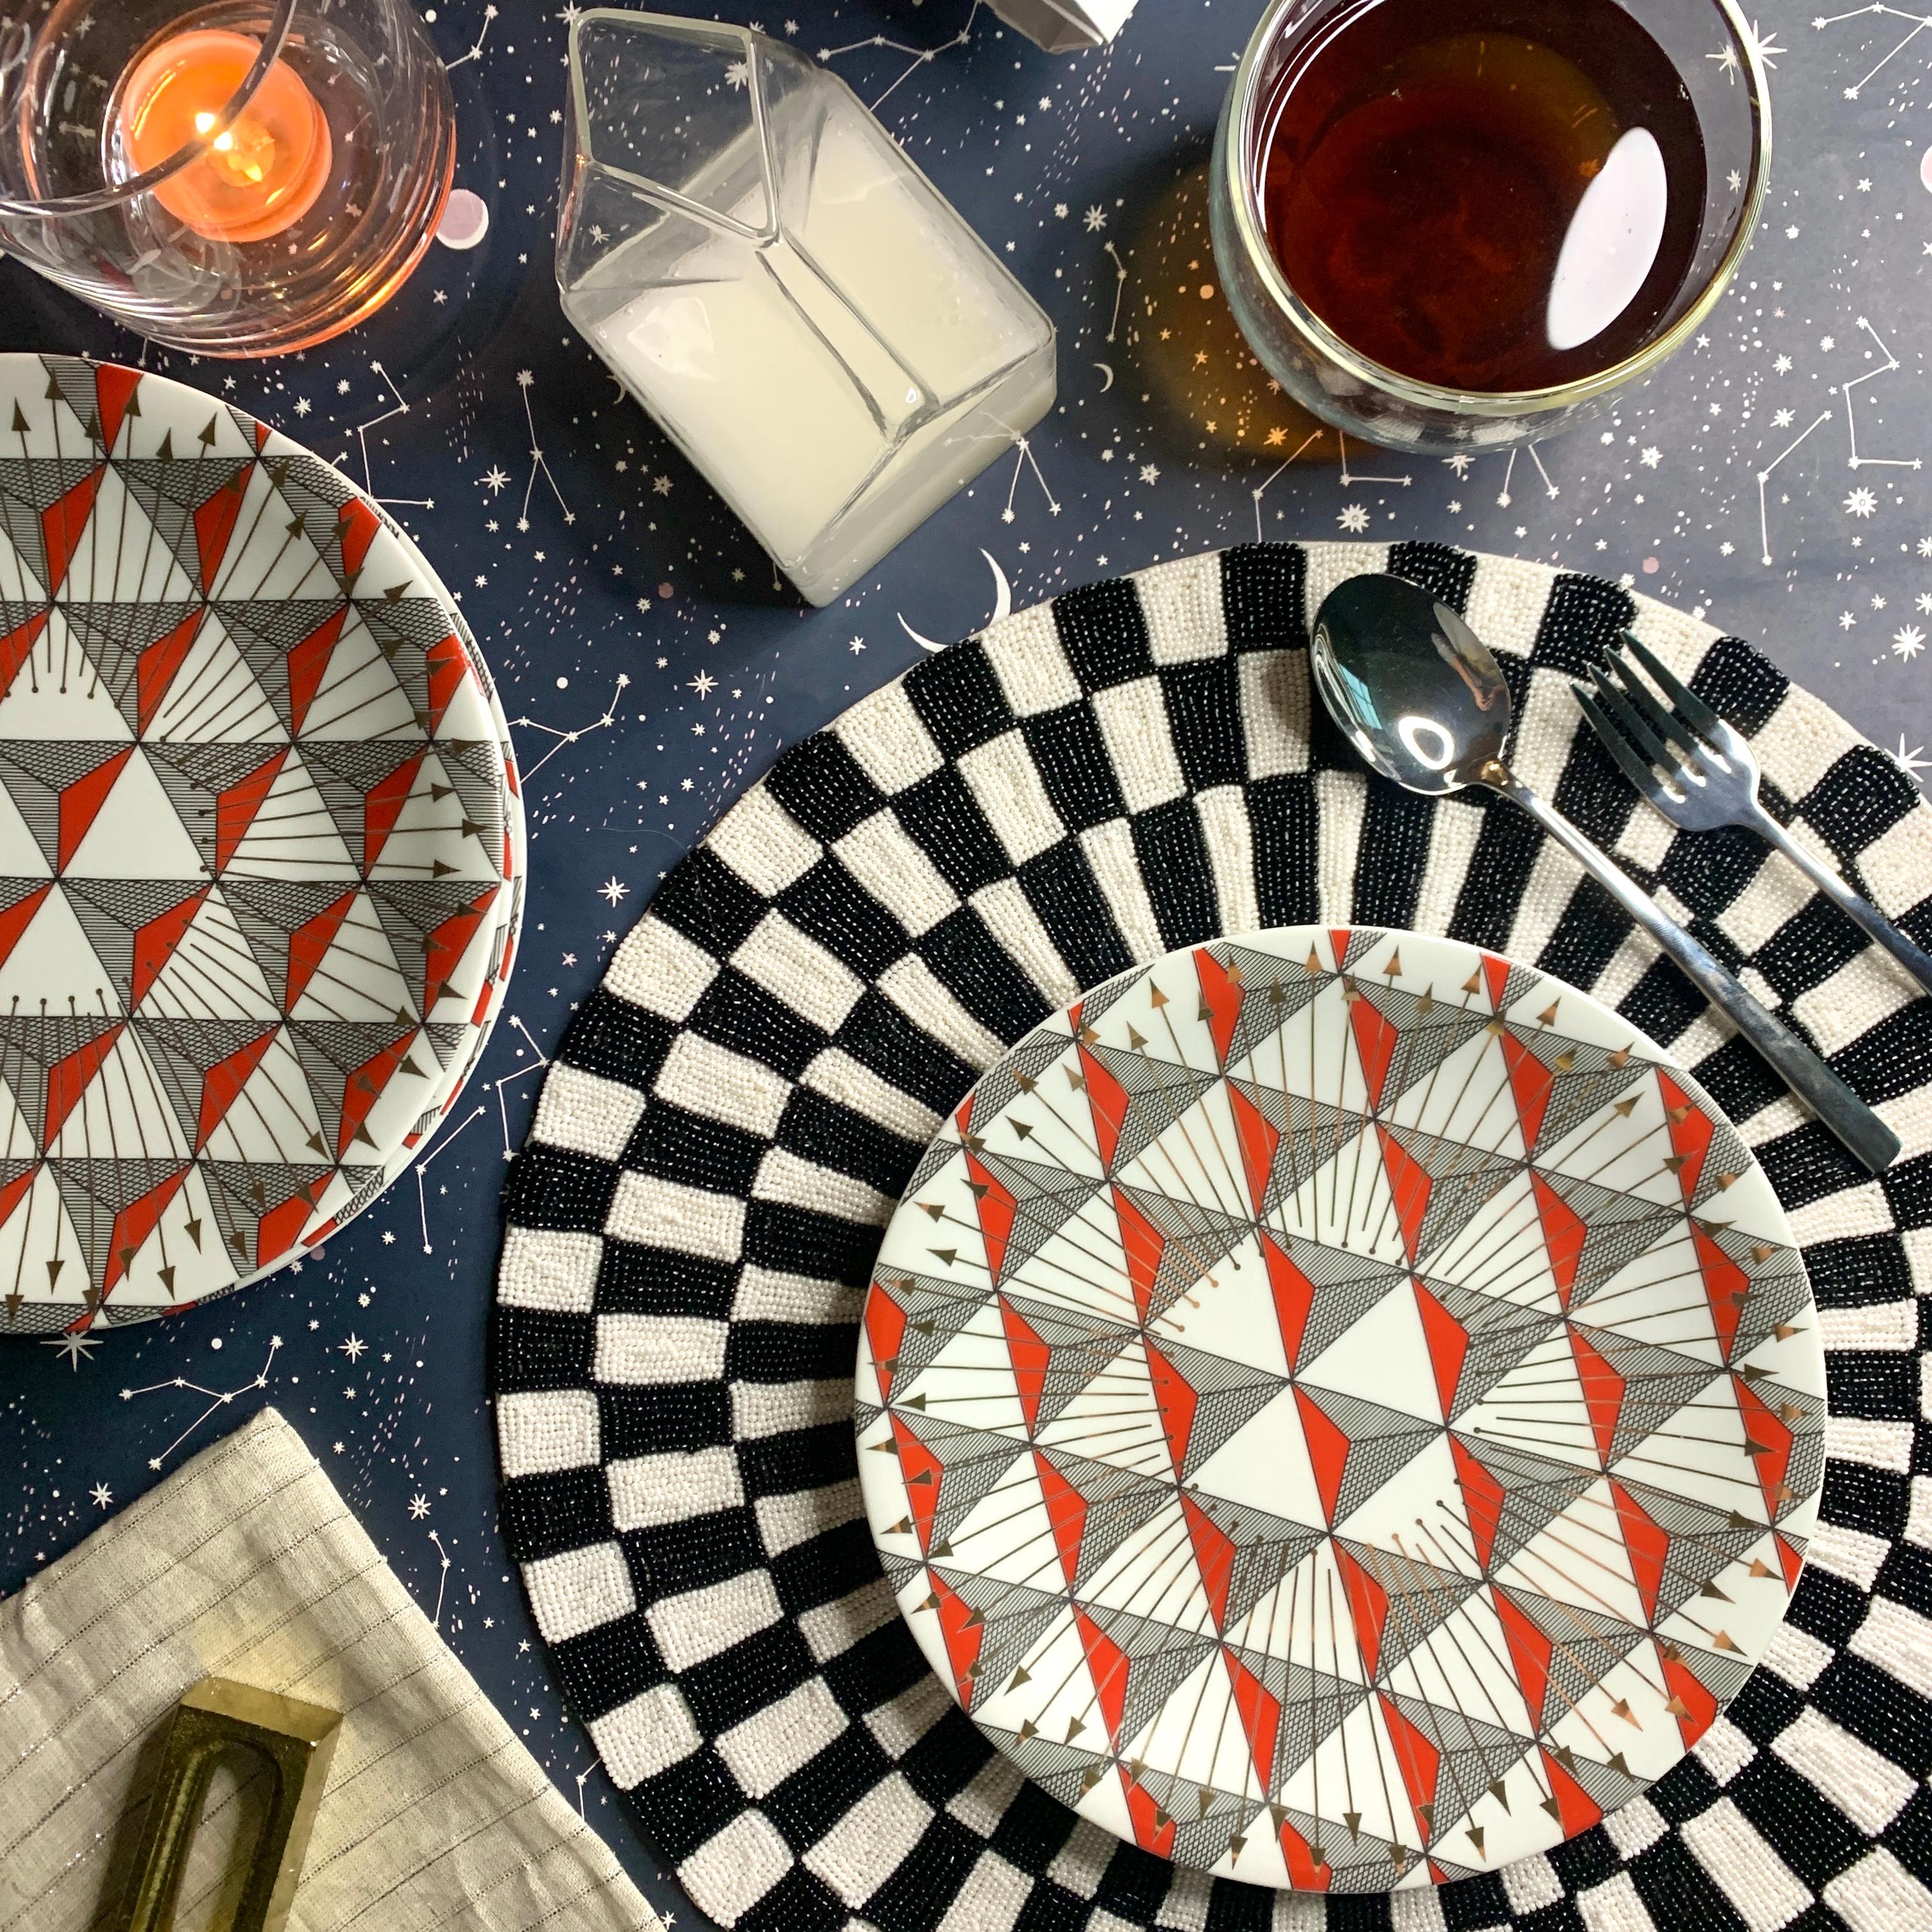 Our most versatile tableware set, Les Noëls dessert set features scarlet hexagon patterns accompanied with dynamic lines of gold. This dinner set will liven any formal or casual dining experience. Perfect for the summertime, perfect for the